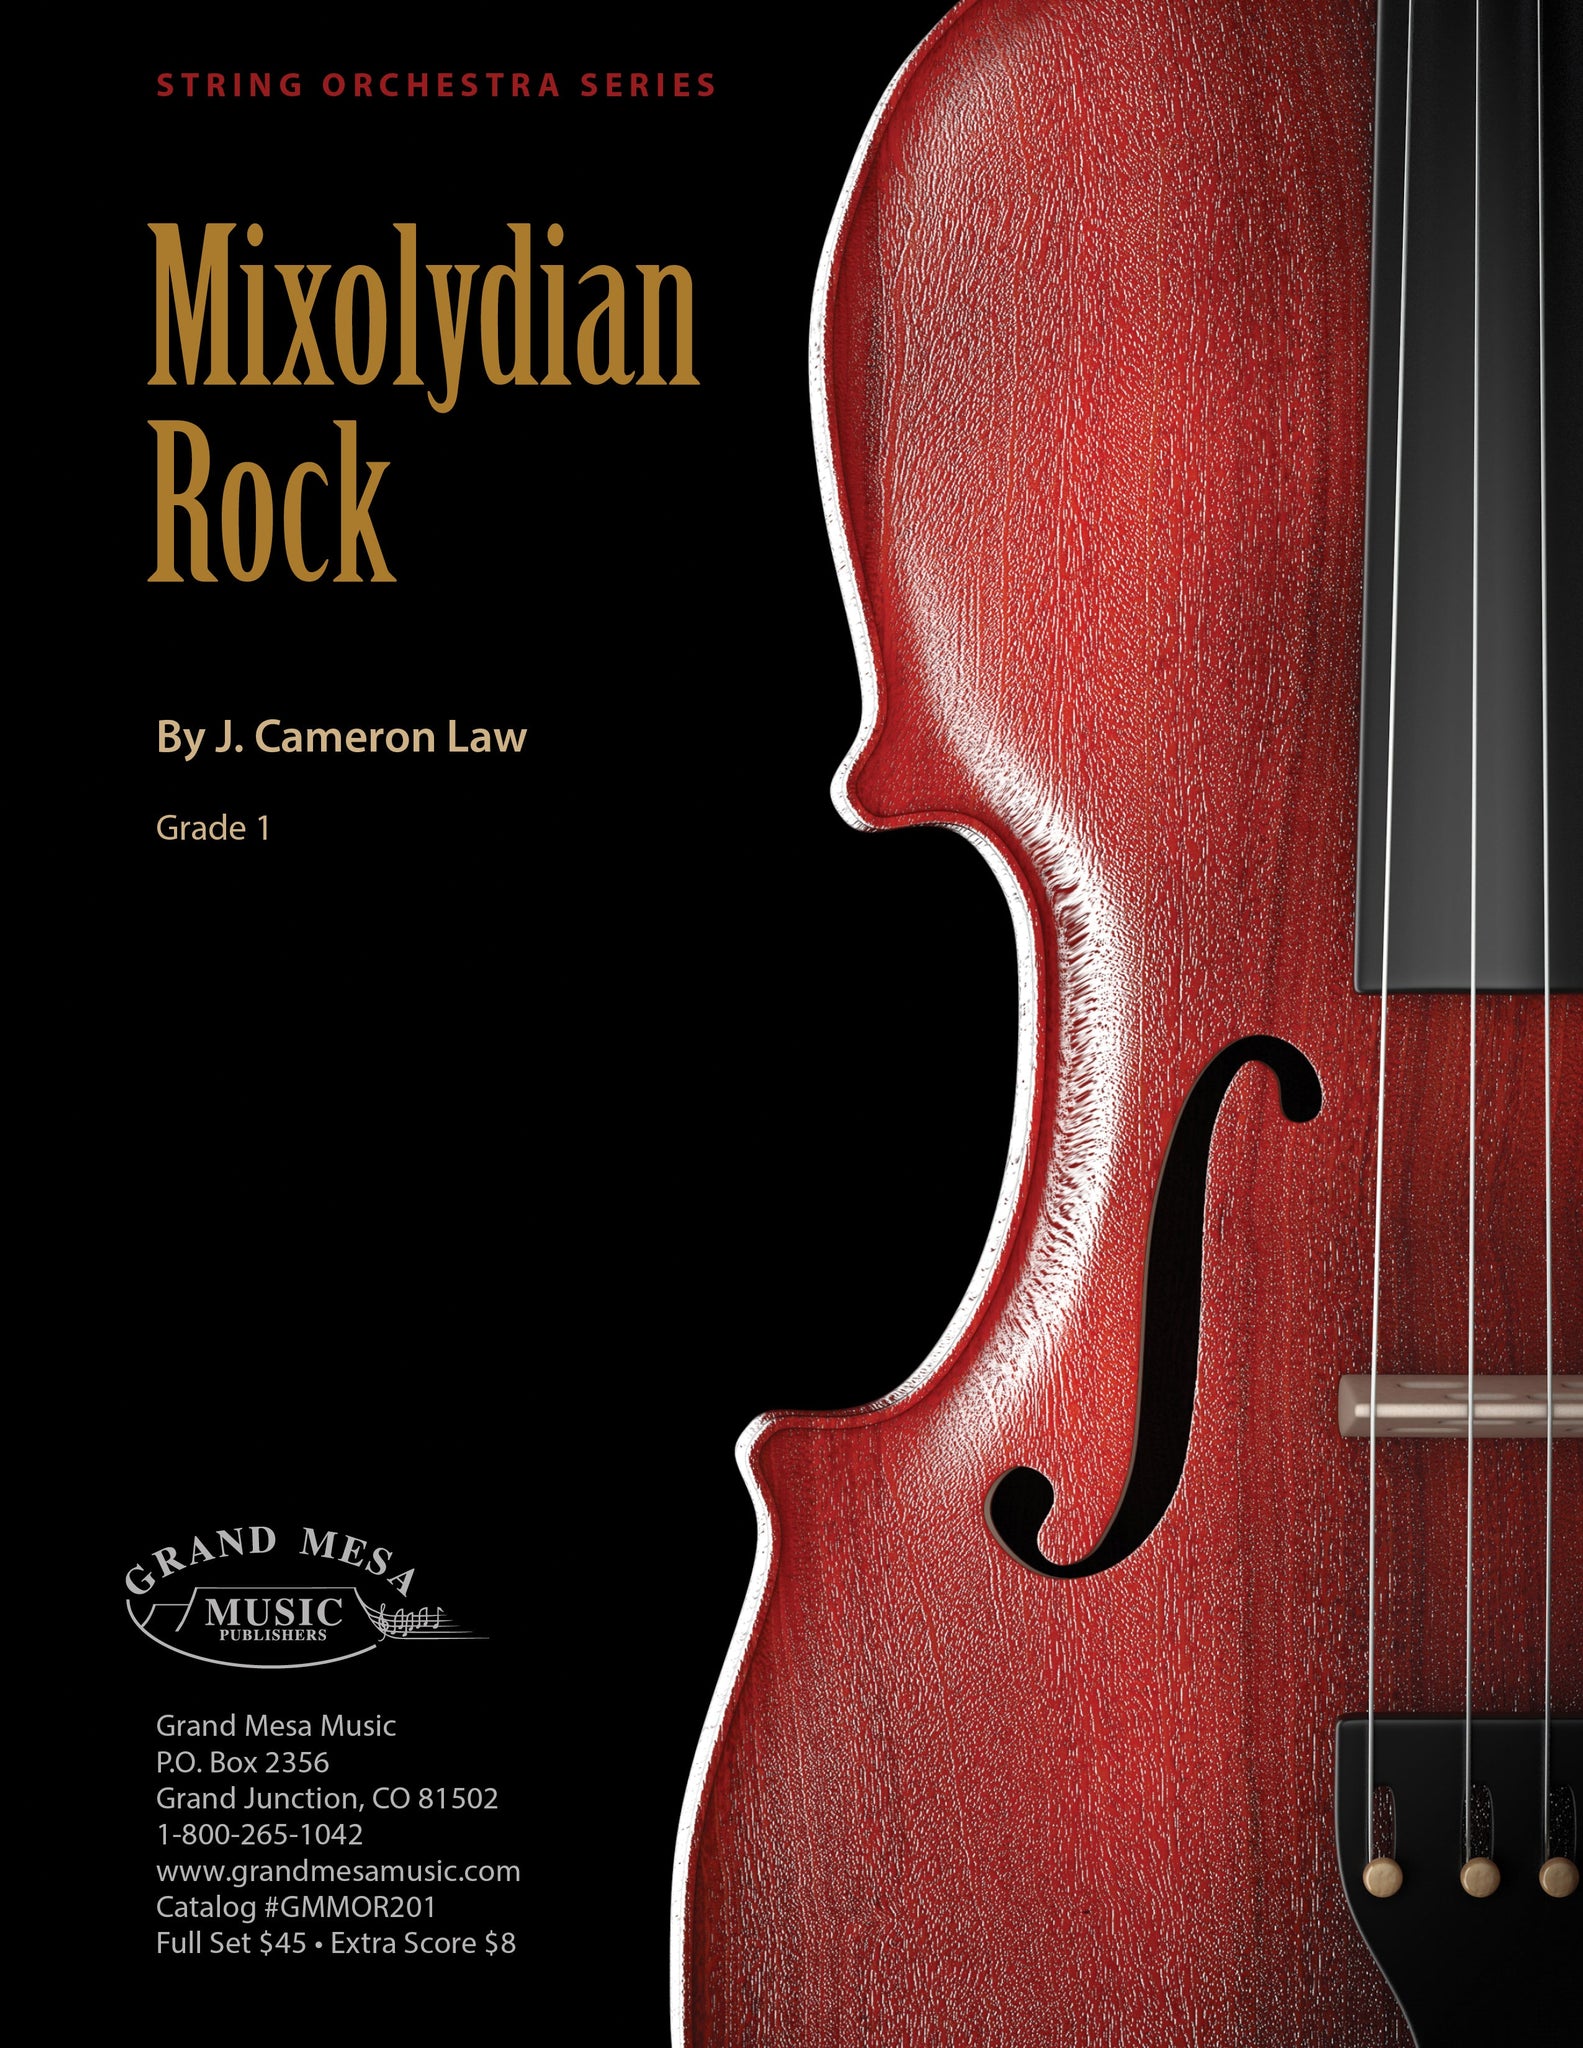 Strings sheet music cover of Mixolydian Rock, composed by J. Cameron Law.